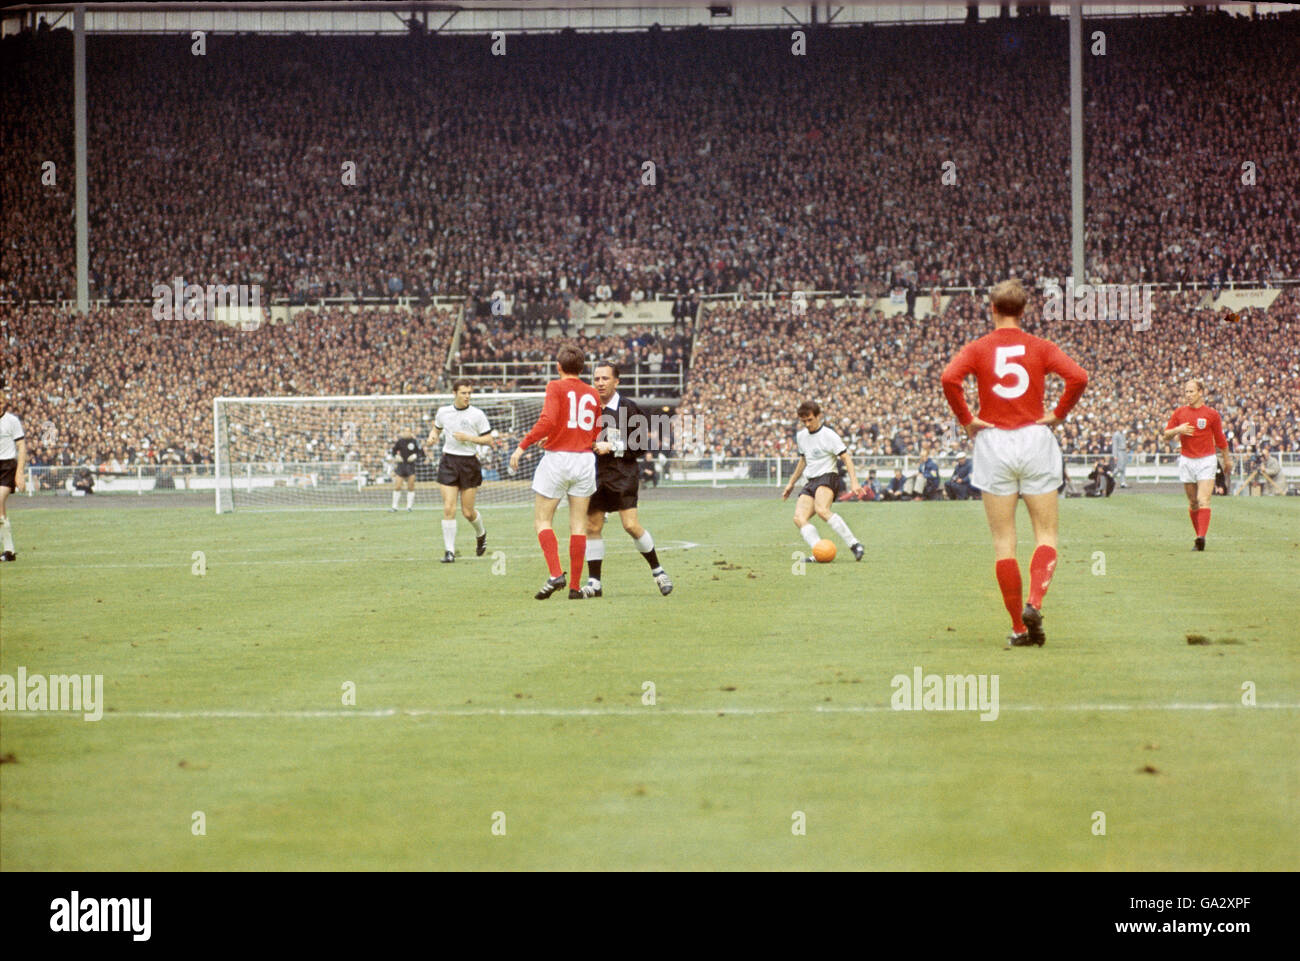 England's Martin Peter's (16) is repremanded by the referee as Jackie Charlton (5) looks on Stock Photo